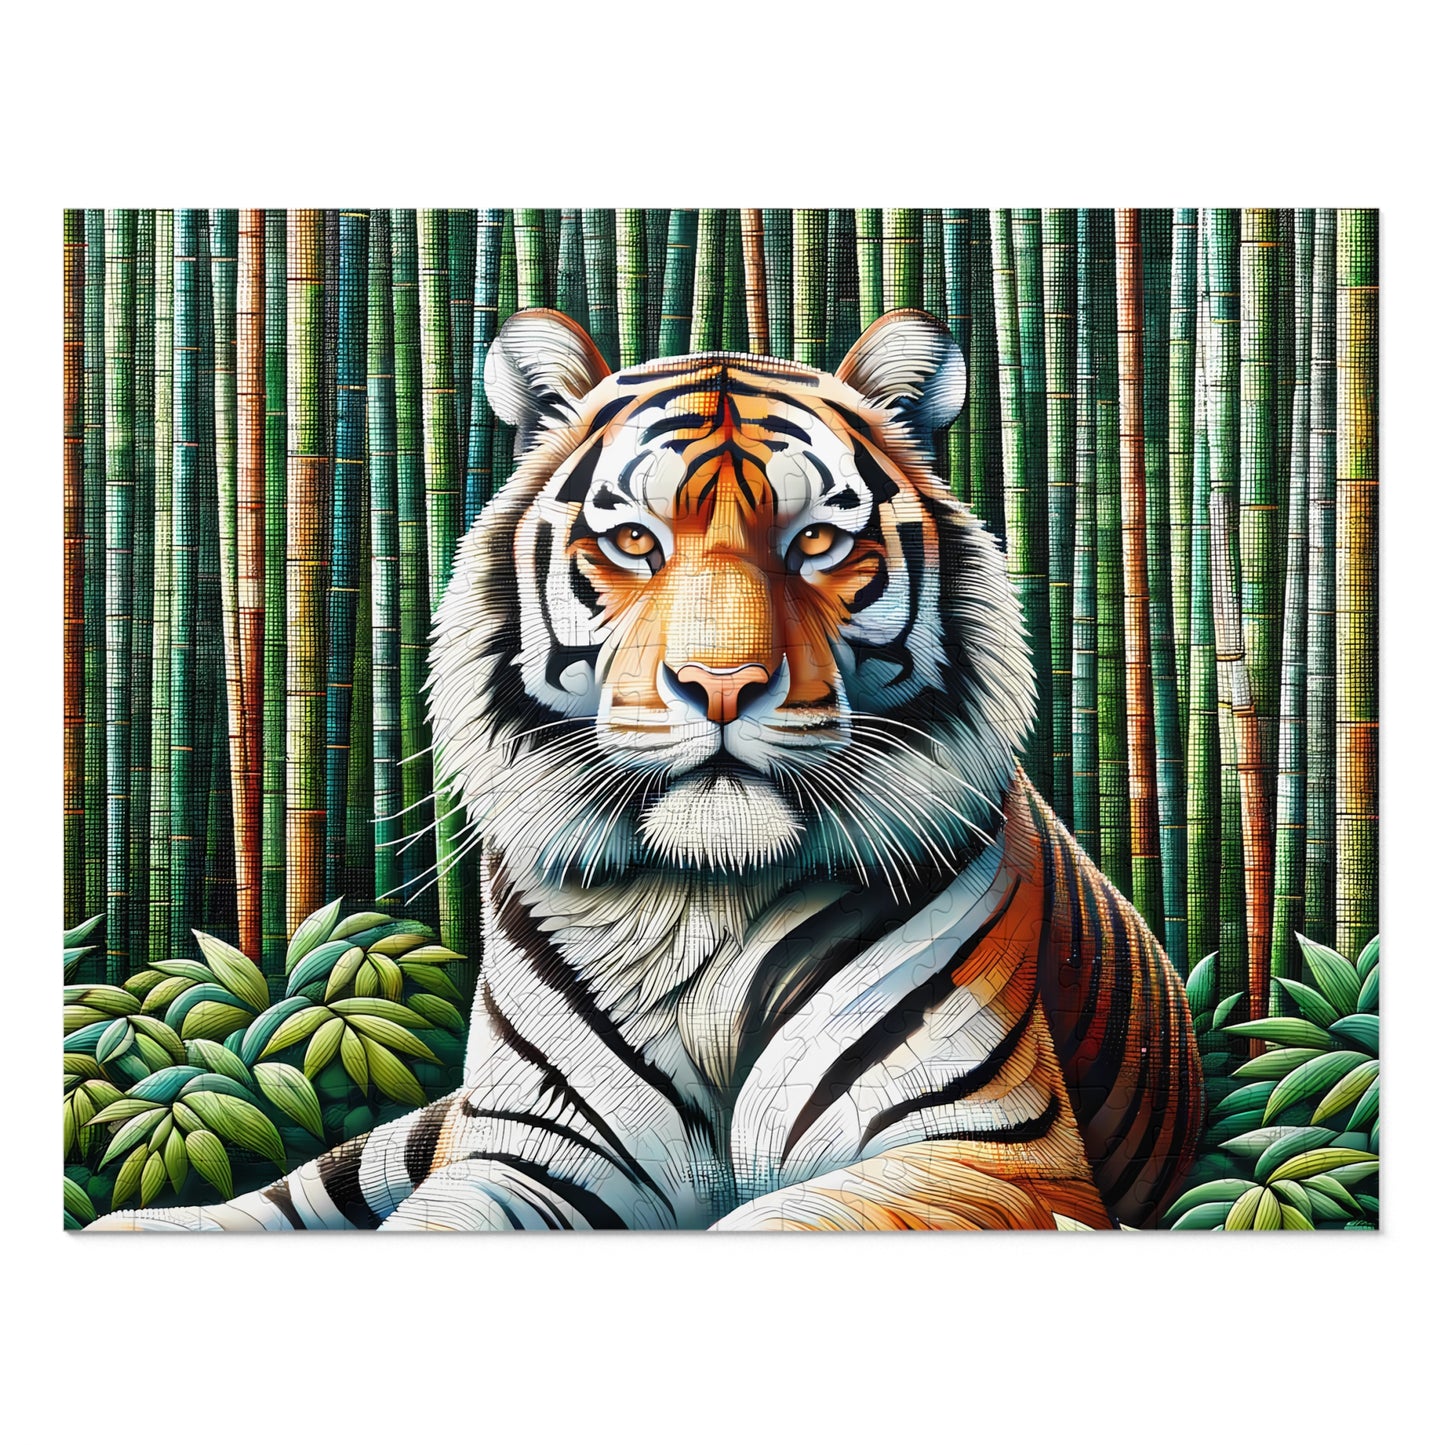 Tiger in Bamboo, Puzzle, Mosiac, Unique, Jigsaw, Family, Adults (110, 252, 500, 1000-Piece)